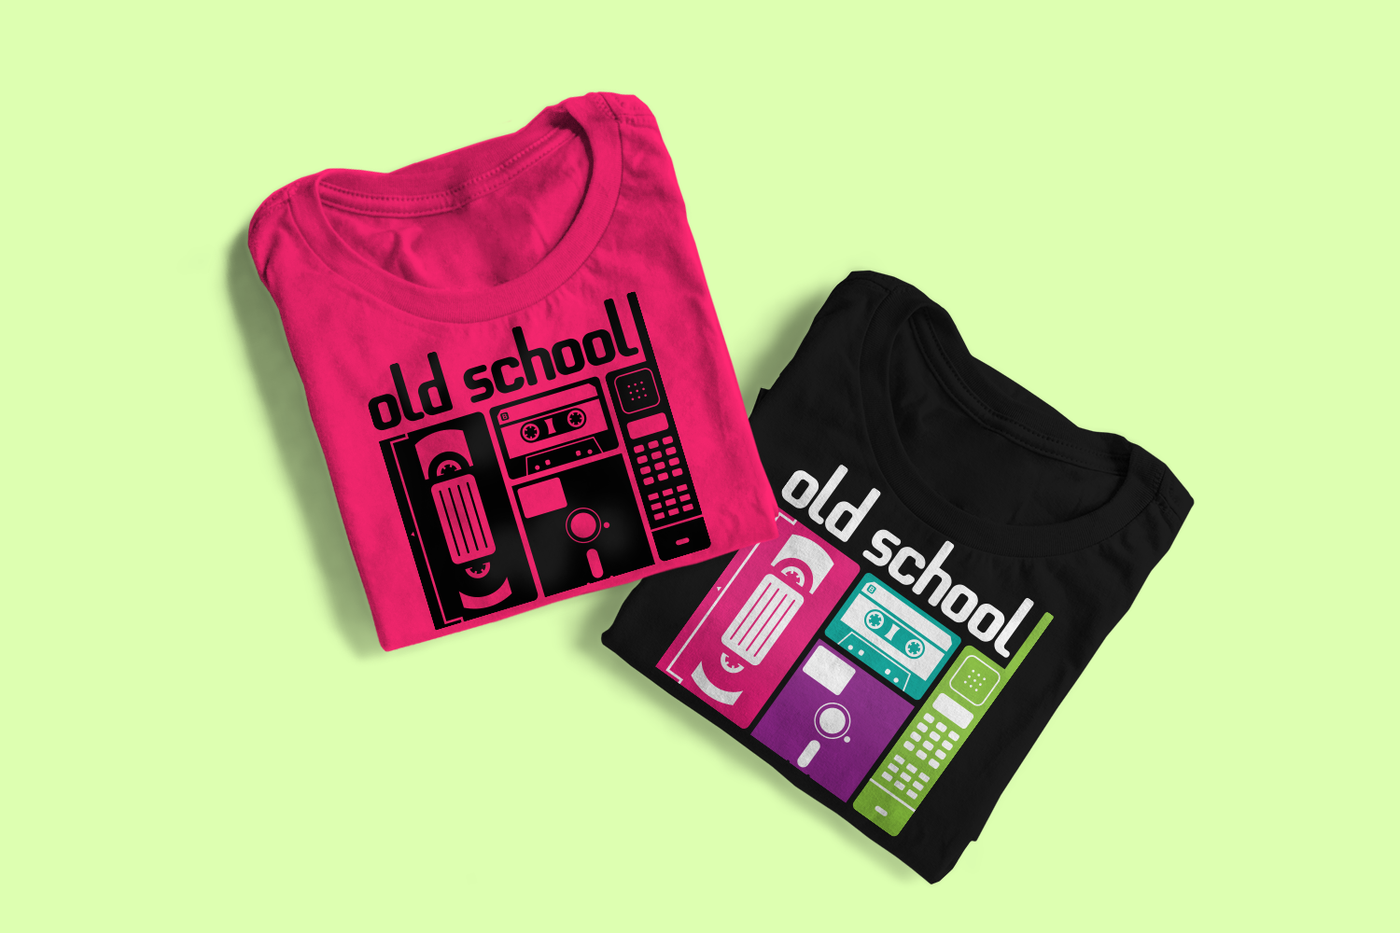 Two shirts that say "old school" with obsolete 1980s tech on it.